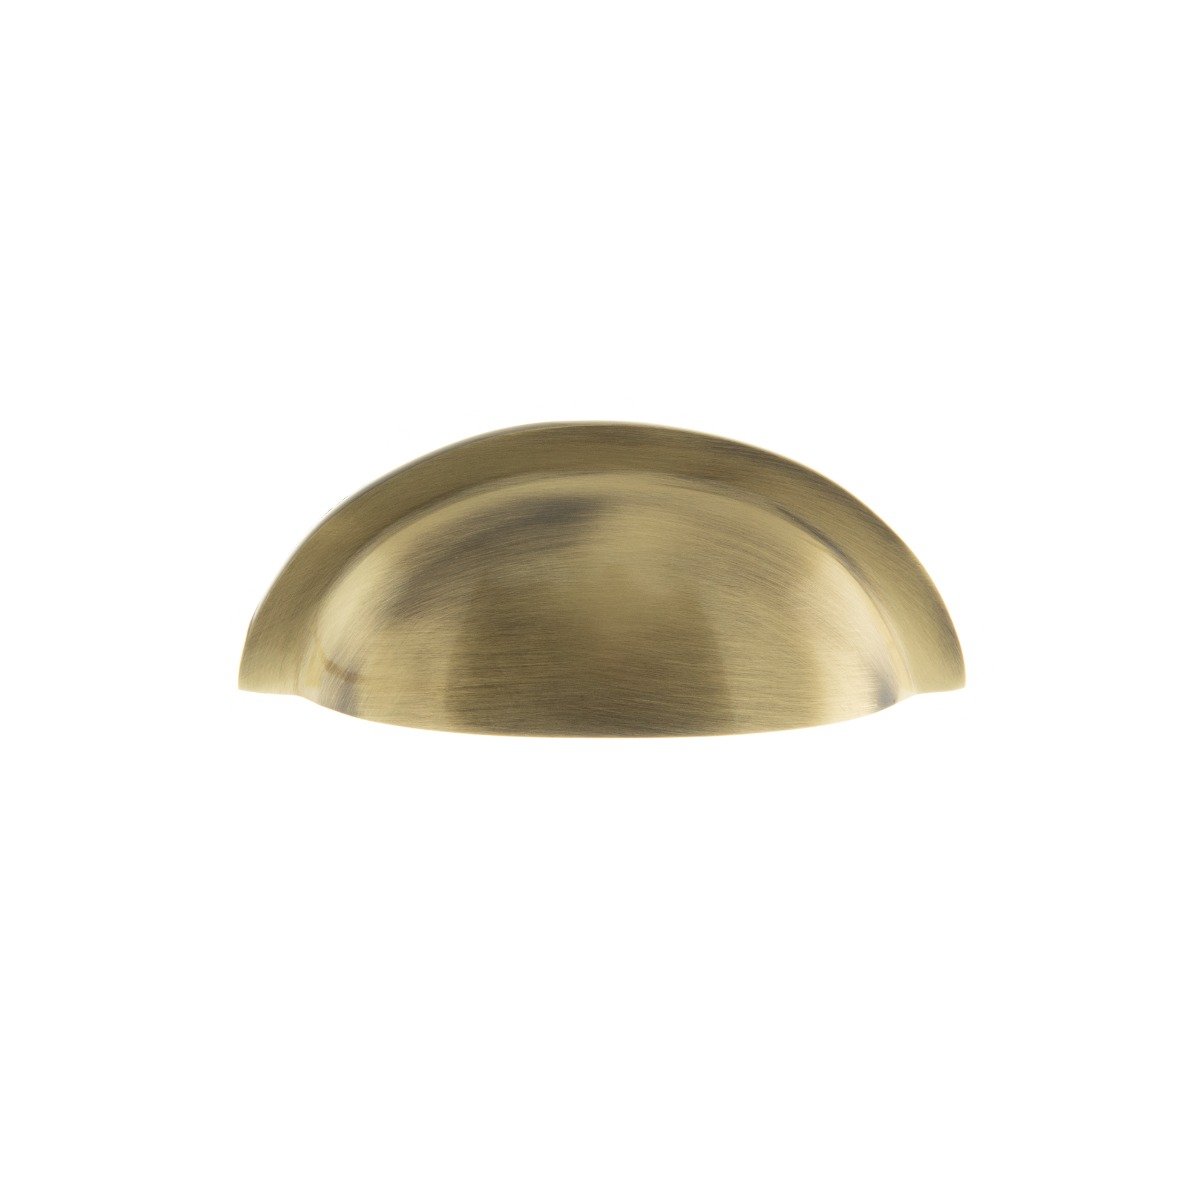 Old English Winchester Solid Brass Cabinet Cup Pull on Concealed Fix - Antique Brass OEC1176AB